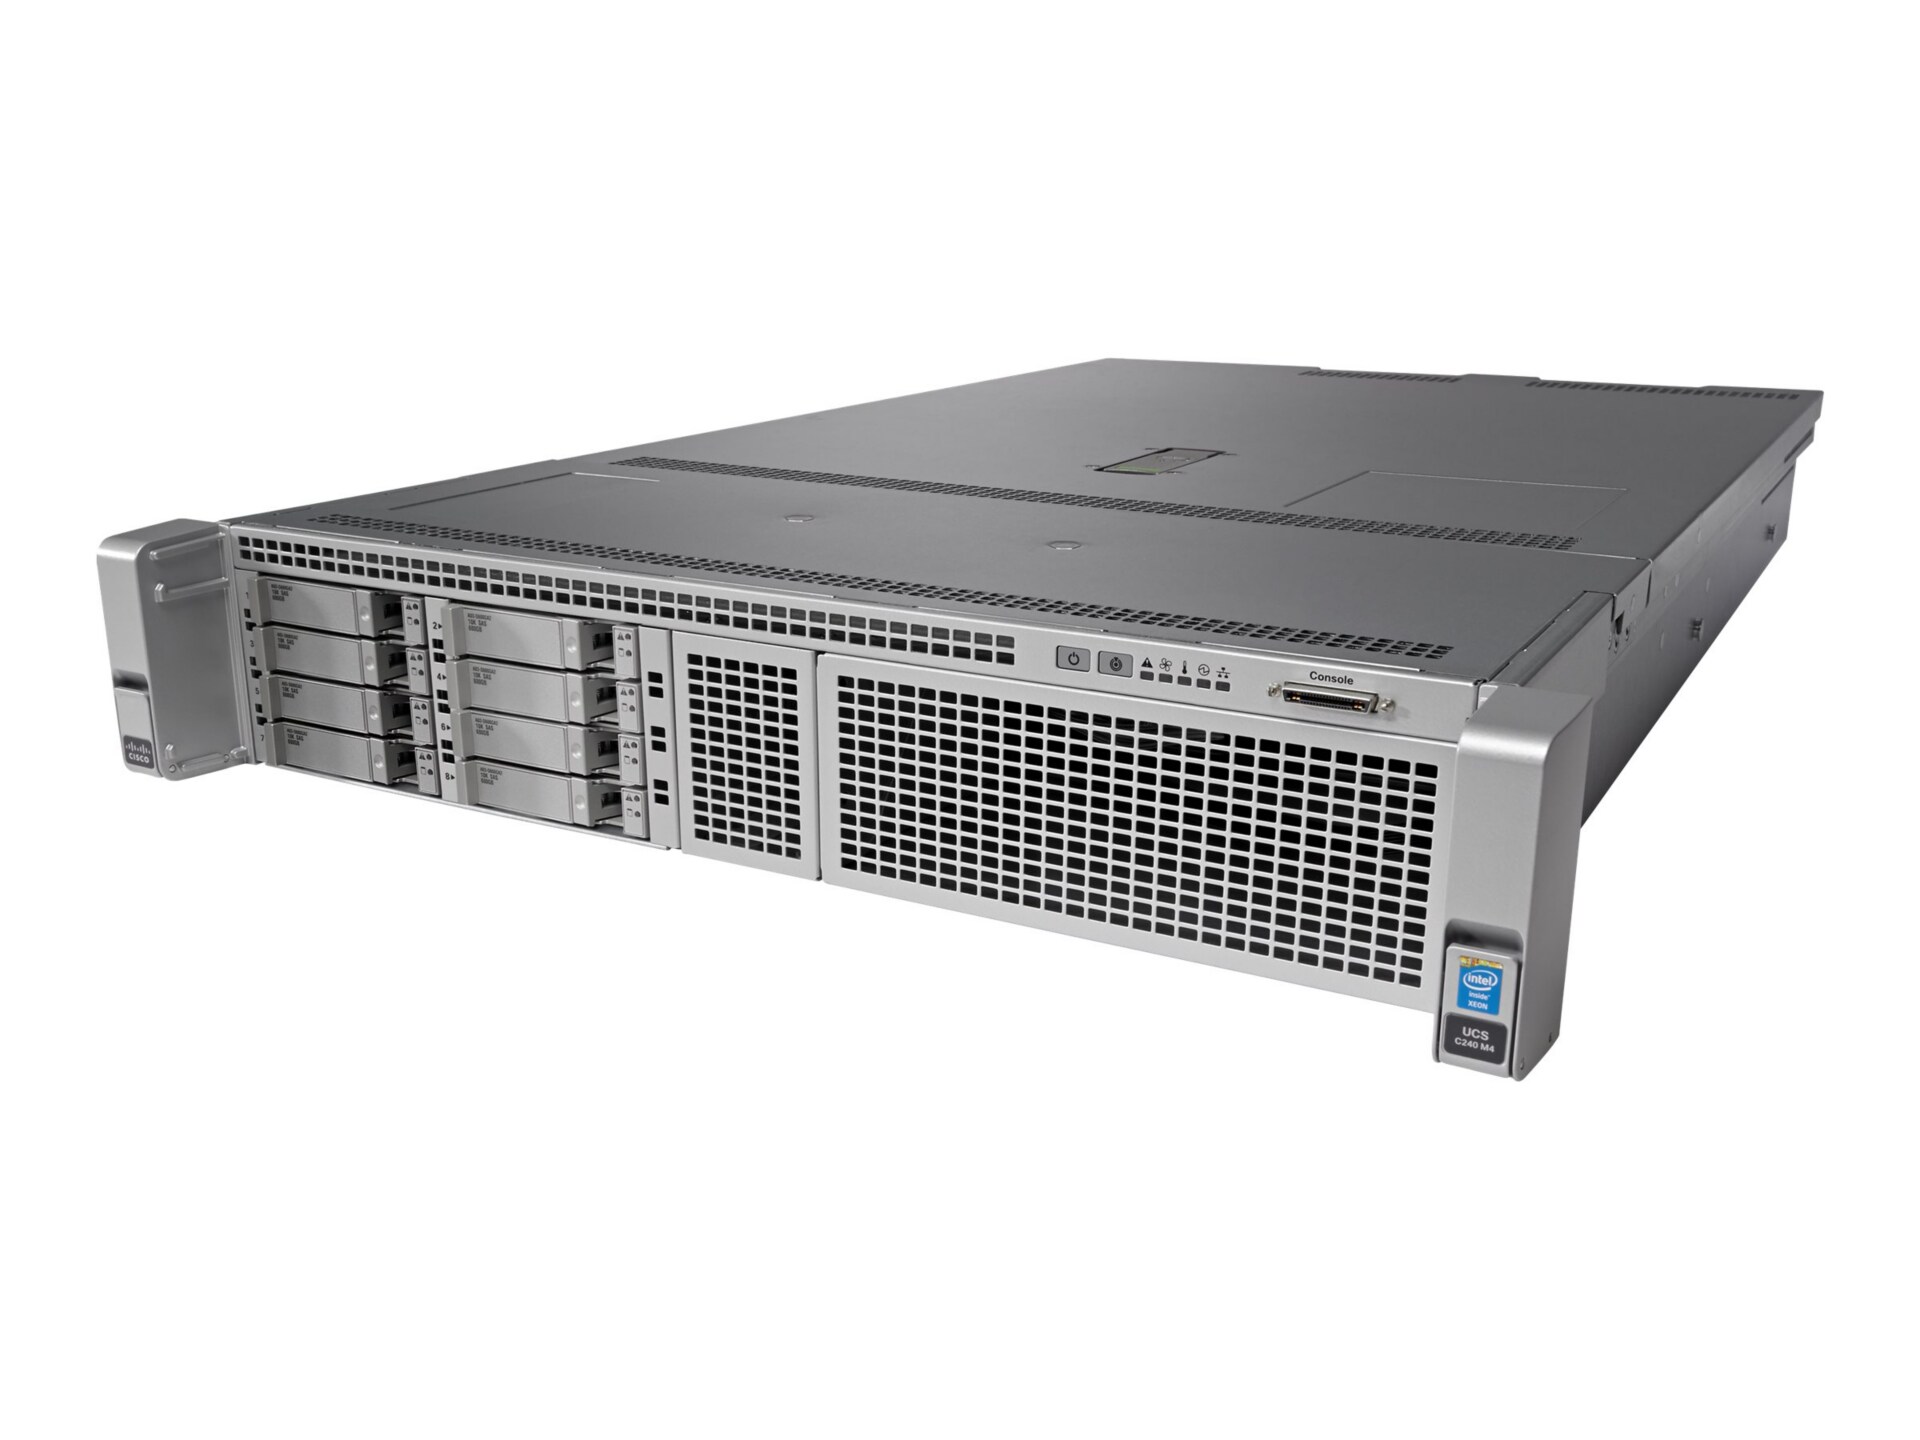 Cisco UCS Smart Play 8 C240 M4 SFF Value Expansion Pack - rack-mountable - Xeon E5-2670V3 2.3 GHz - 128 GB - no HDD